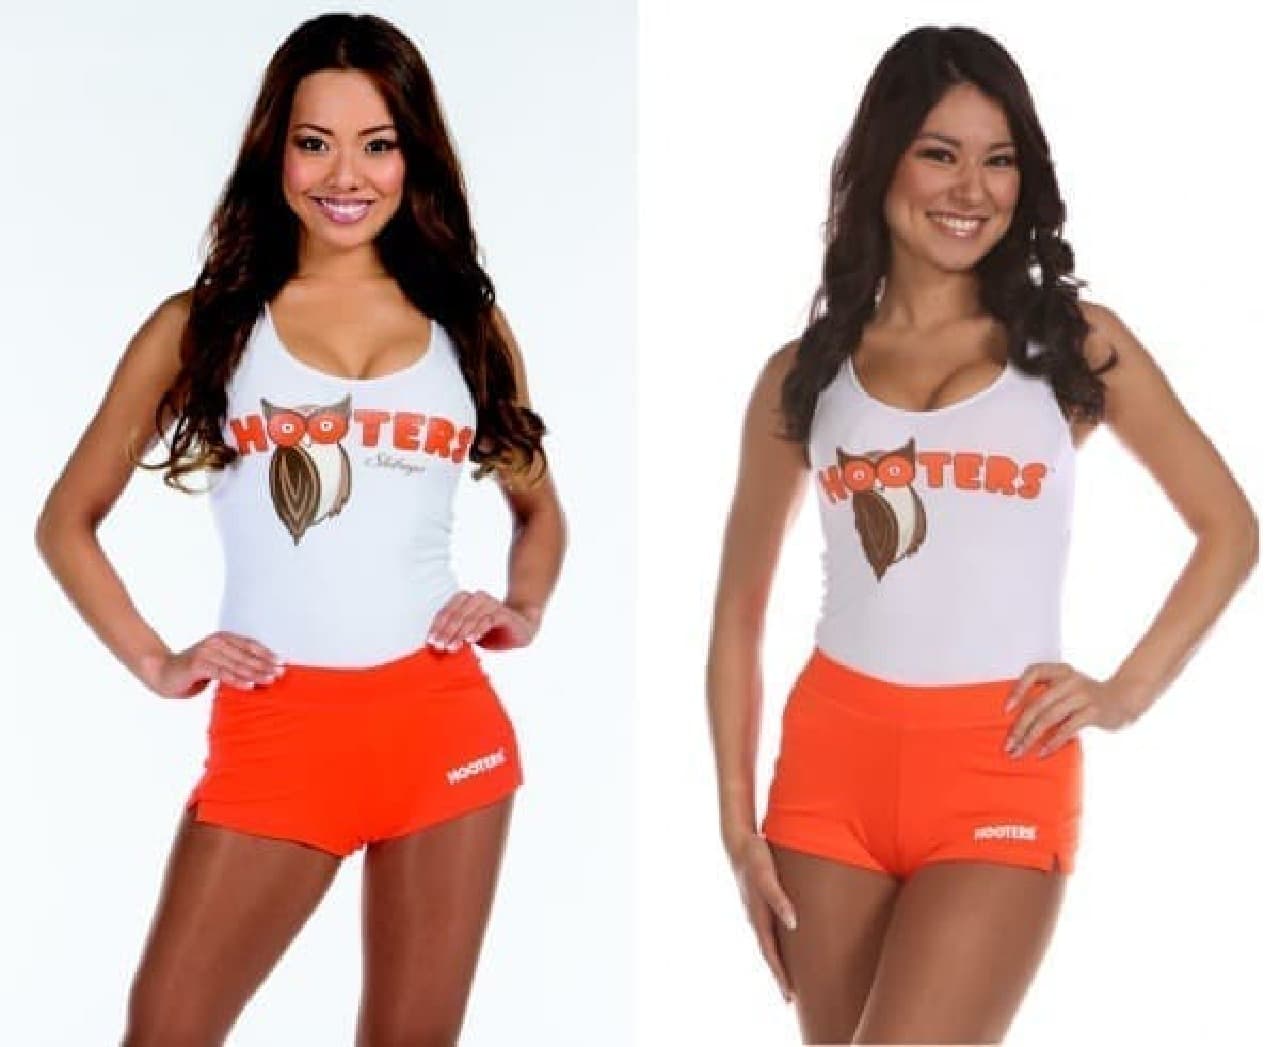 Hooters Girl who will liven up the first day of the opening Miss Hooters Japan 2015 (left) and 2014 (right)